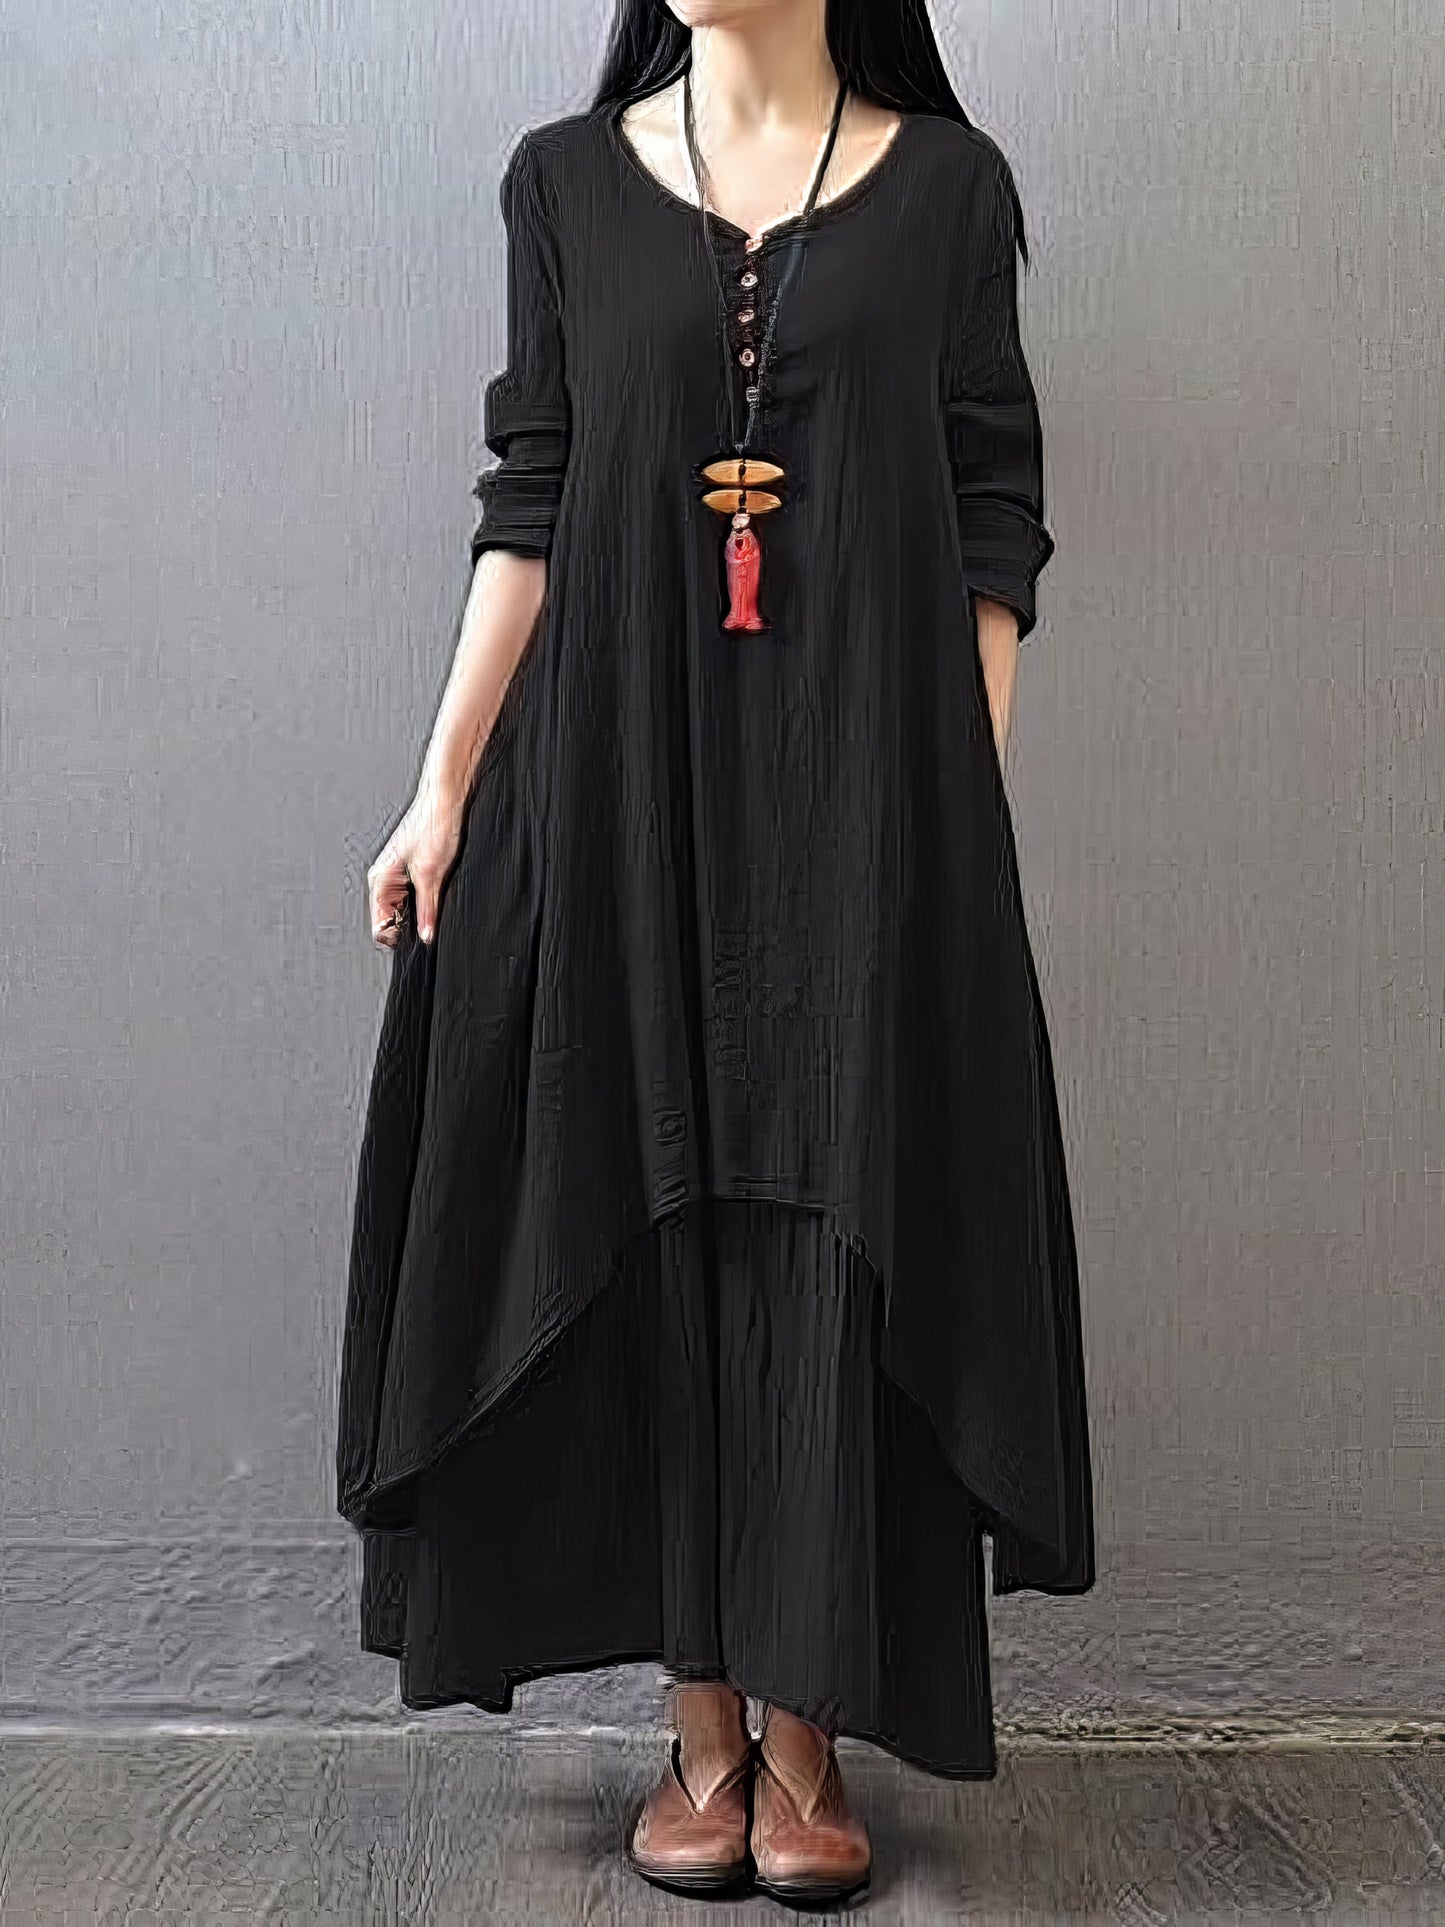 Maxi Dresses - Casual Swing Solid Color Long Sleeve Button Fake V Neck Basic Maxi Dress - MsDressly